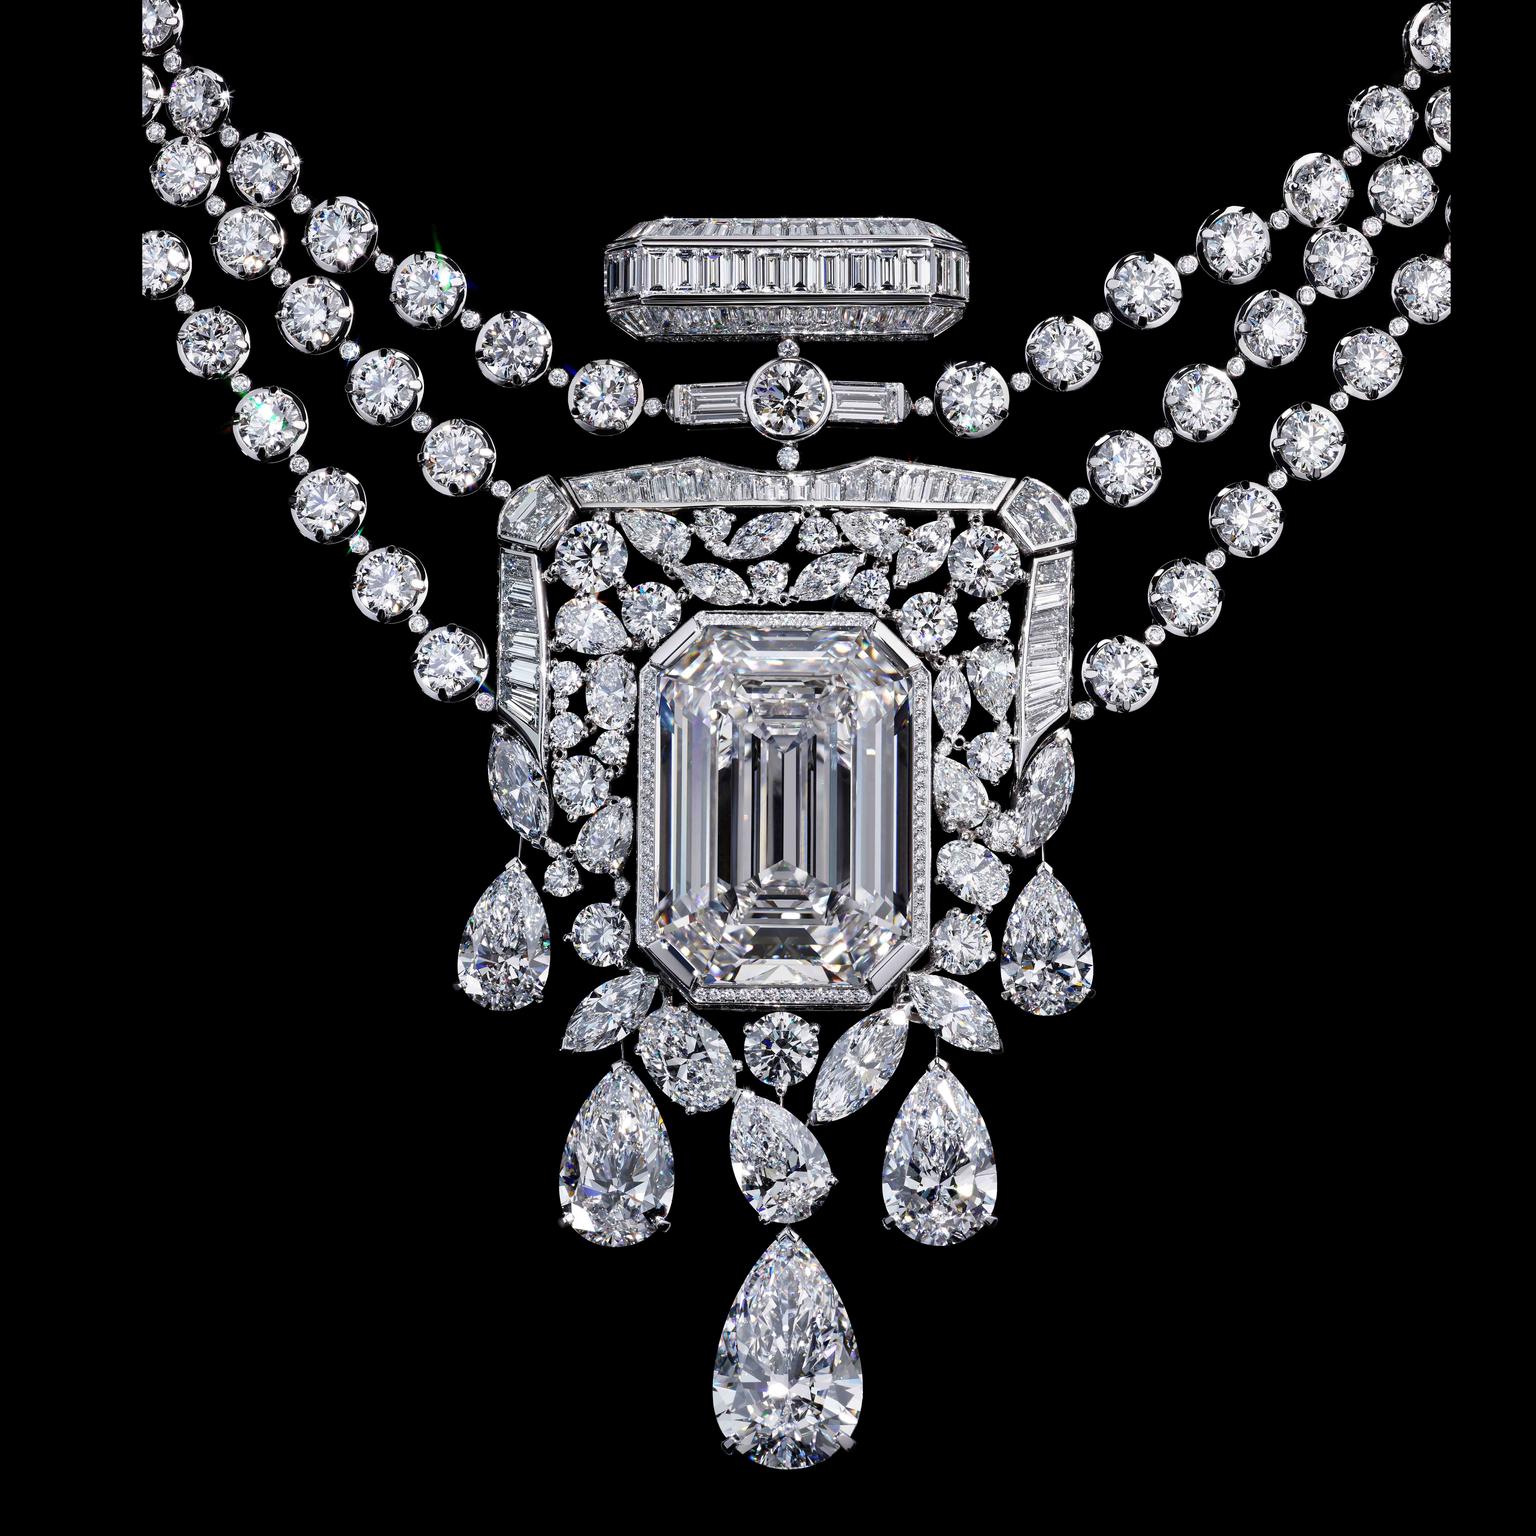 No5 high jewellery necklace by chanel, Chanel